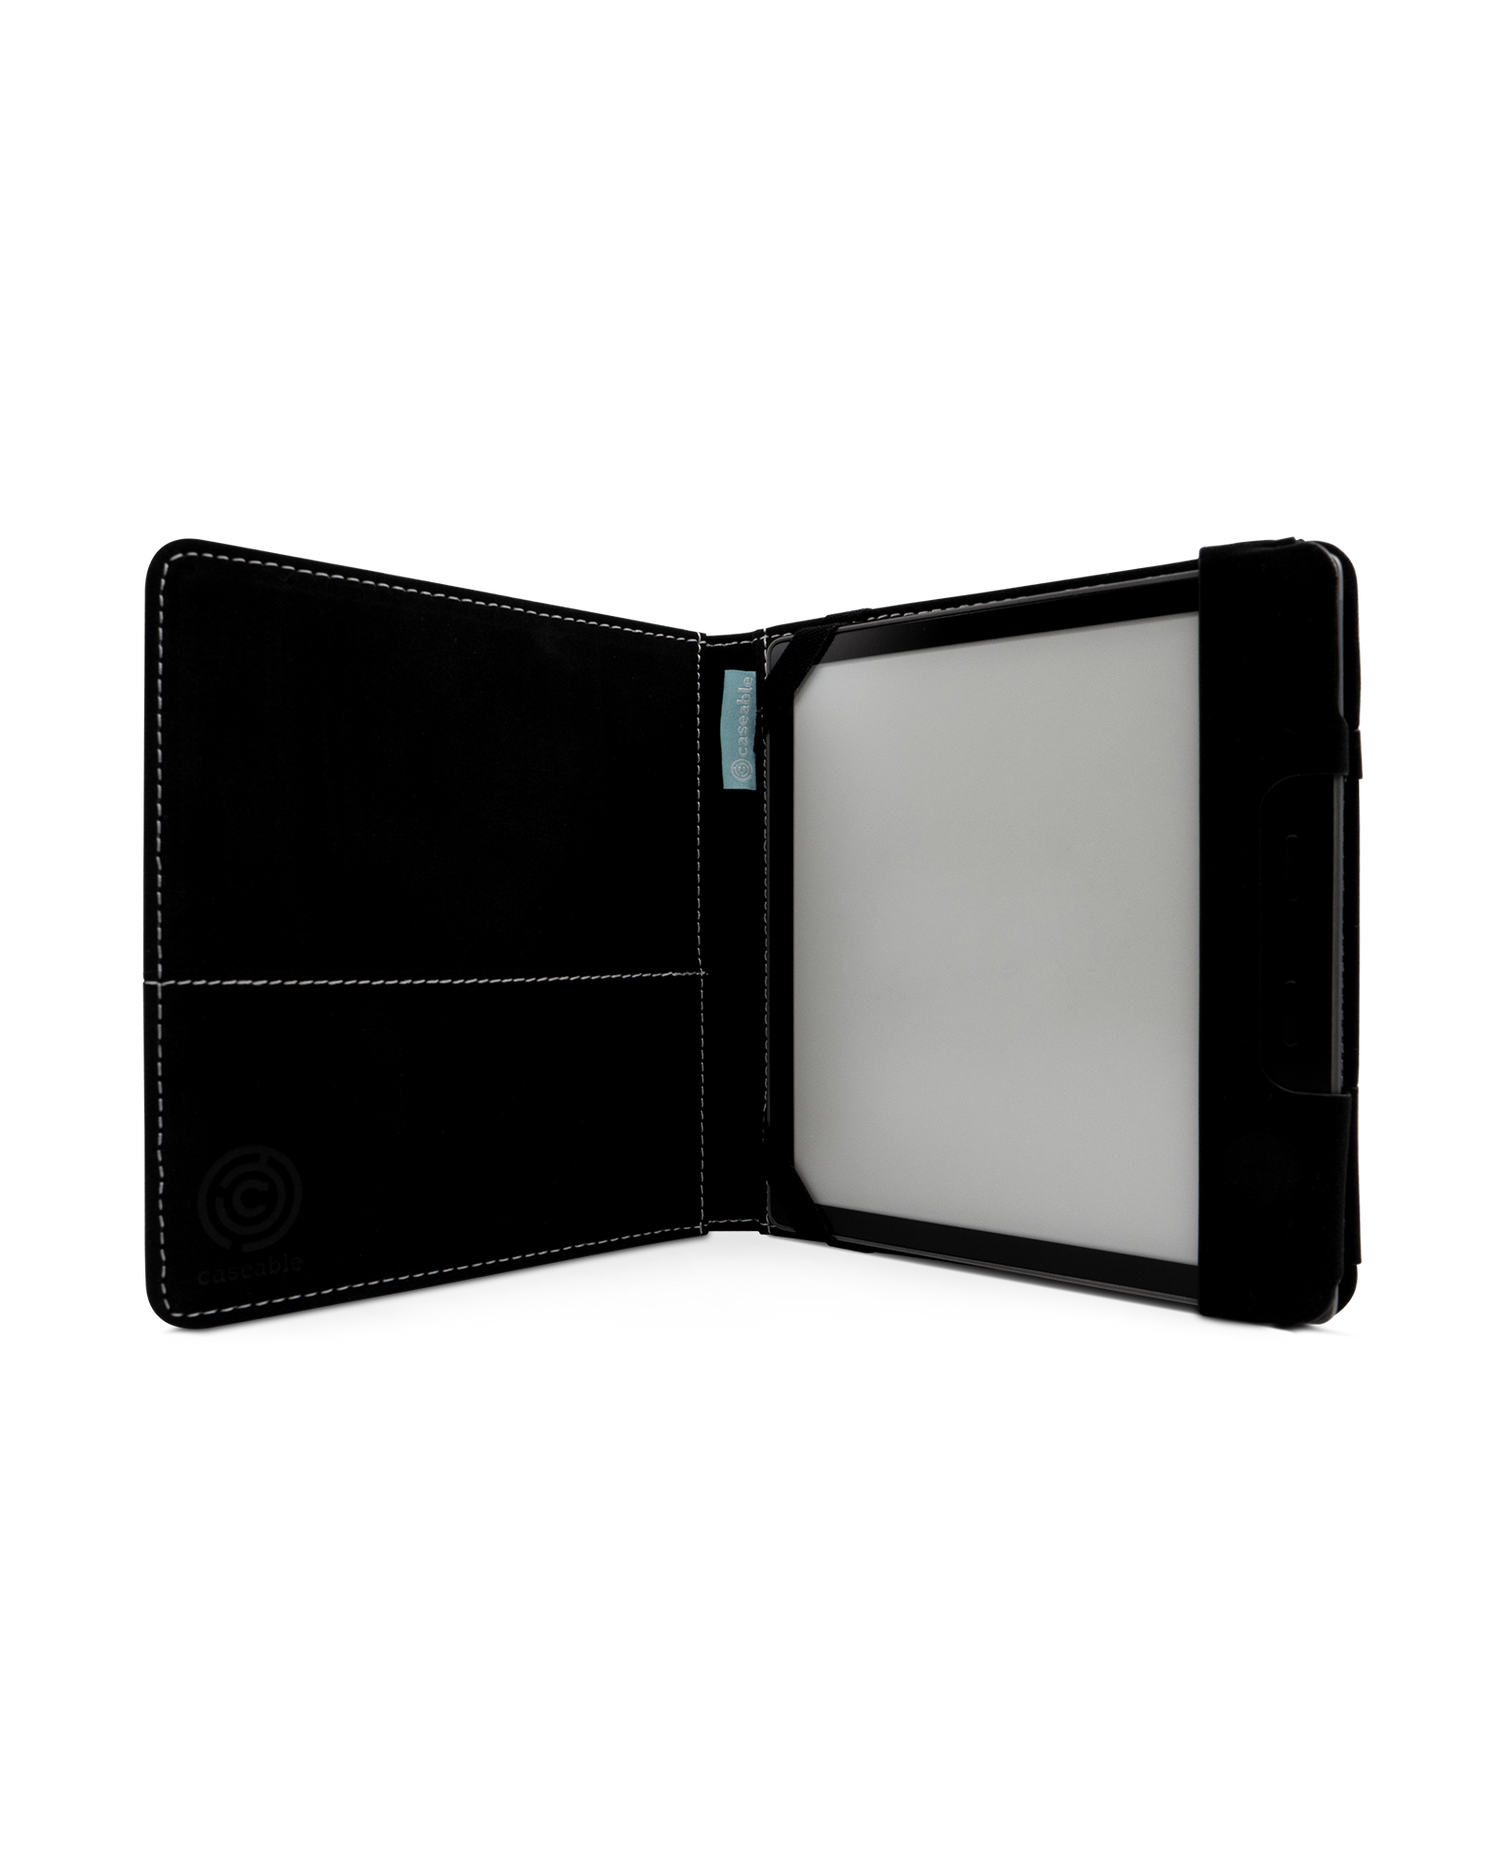 White Marble eReader Case for tolino vision 6: Opened interior view